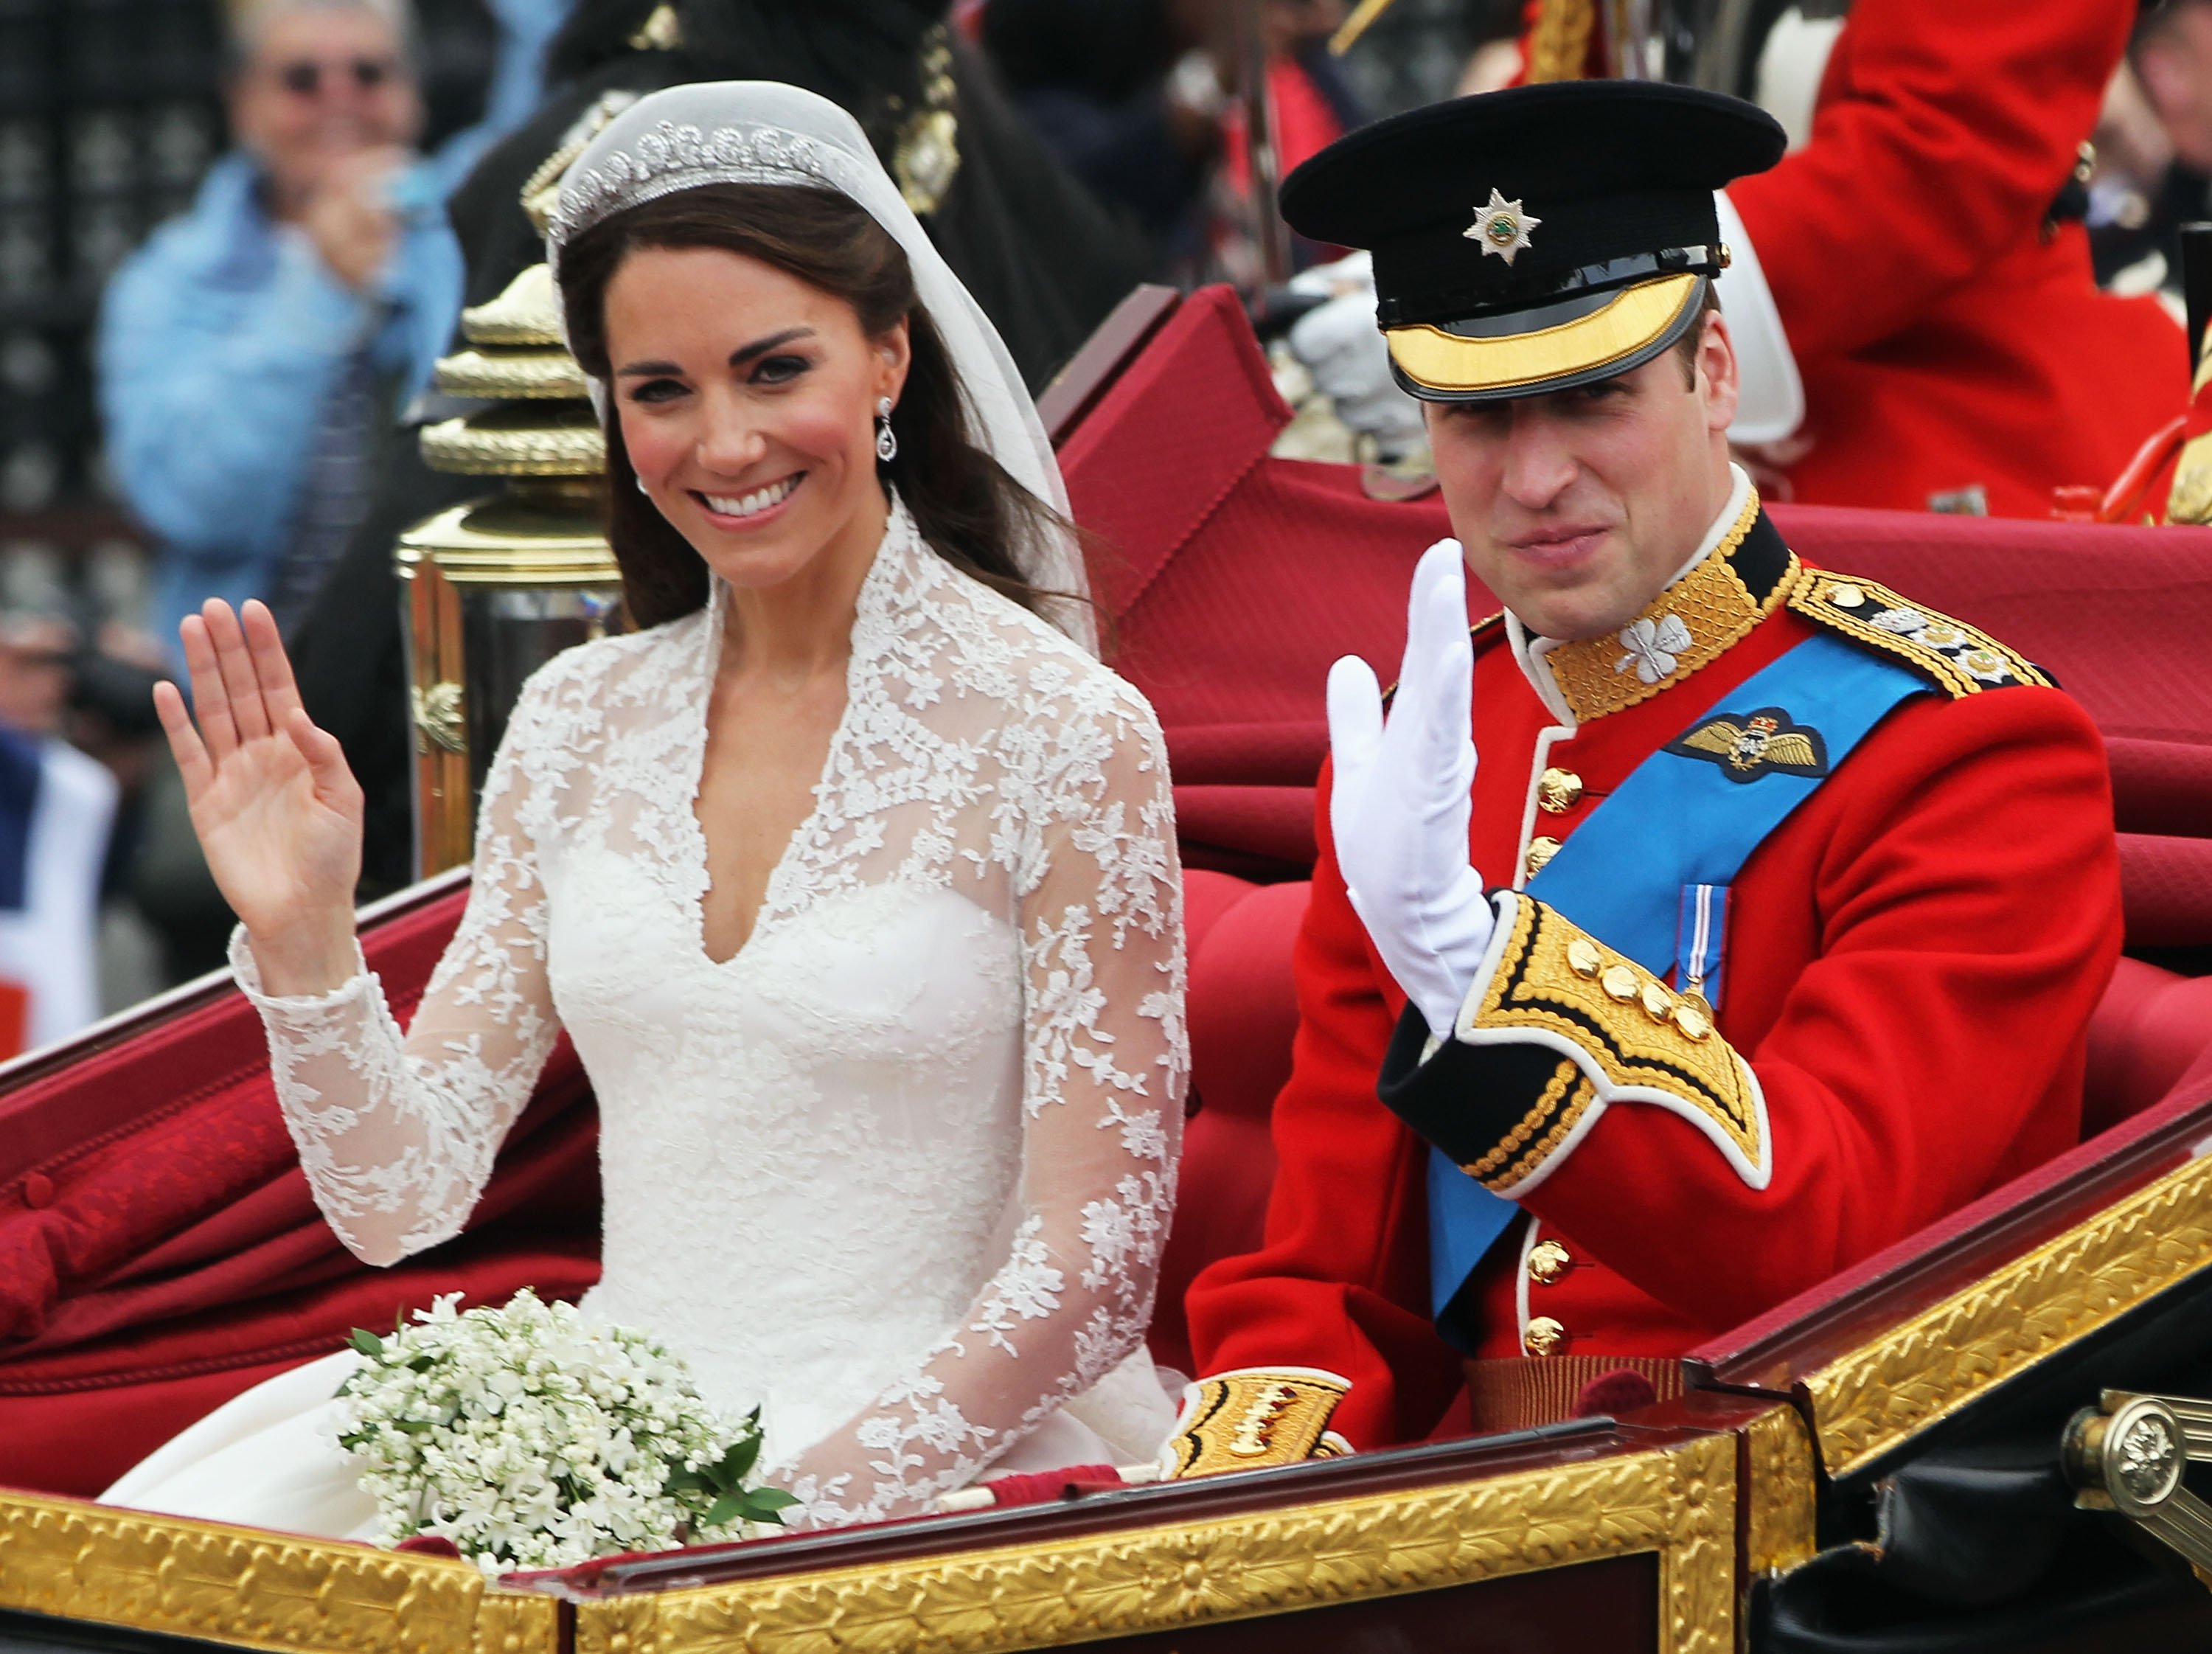 Kate Middleton and Prince William on their wedding day in London 2011. | Source: Getty Images